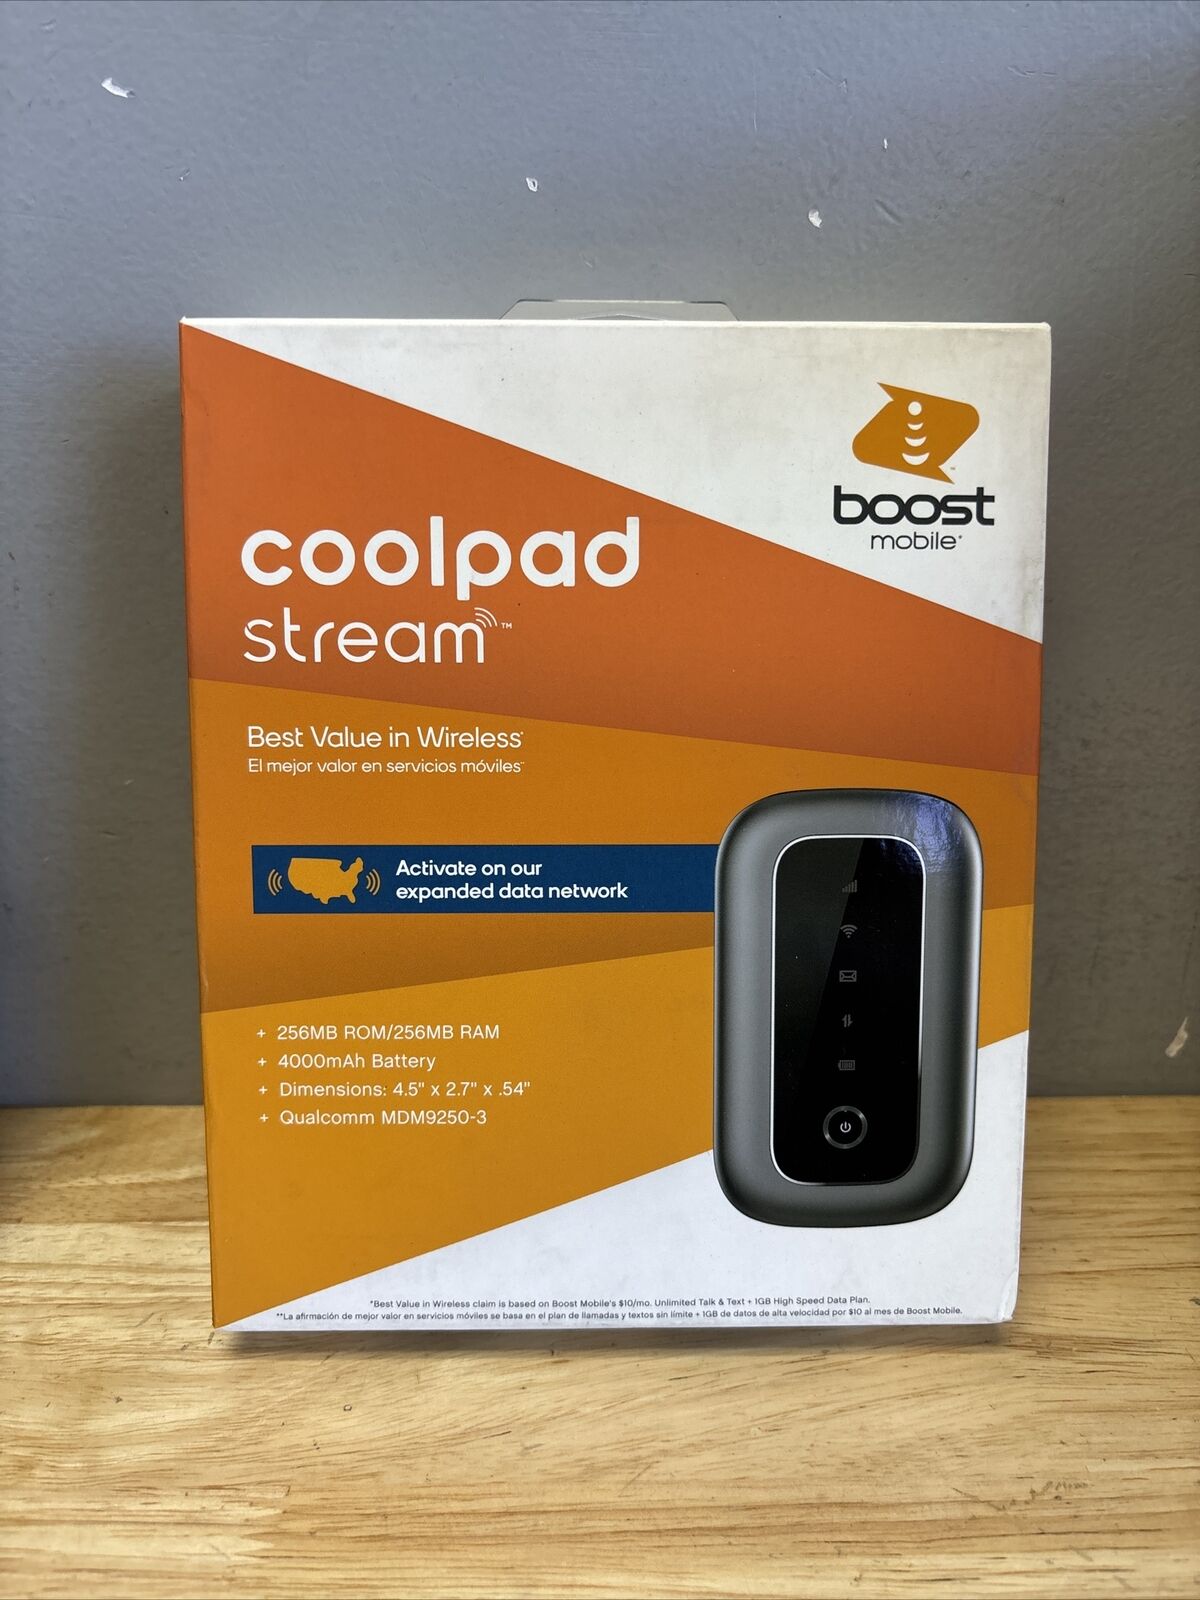 Boost Mobile Coolpad Stream 4G LTE Extended Range WiFi Hot Spot Prepaid - SEALED